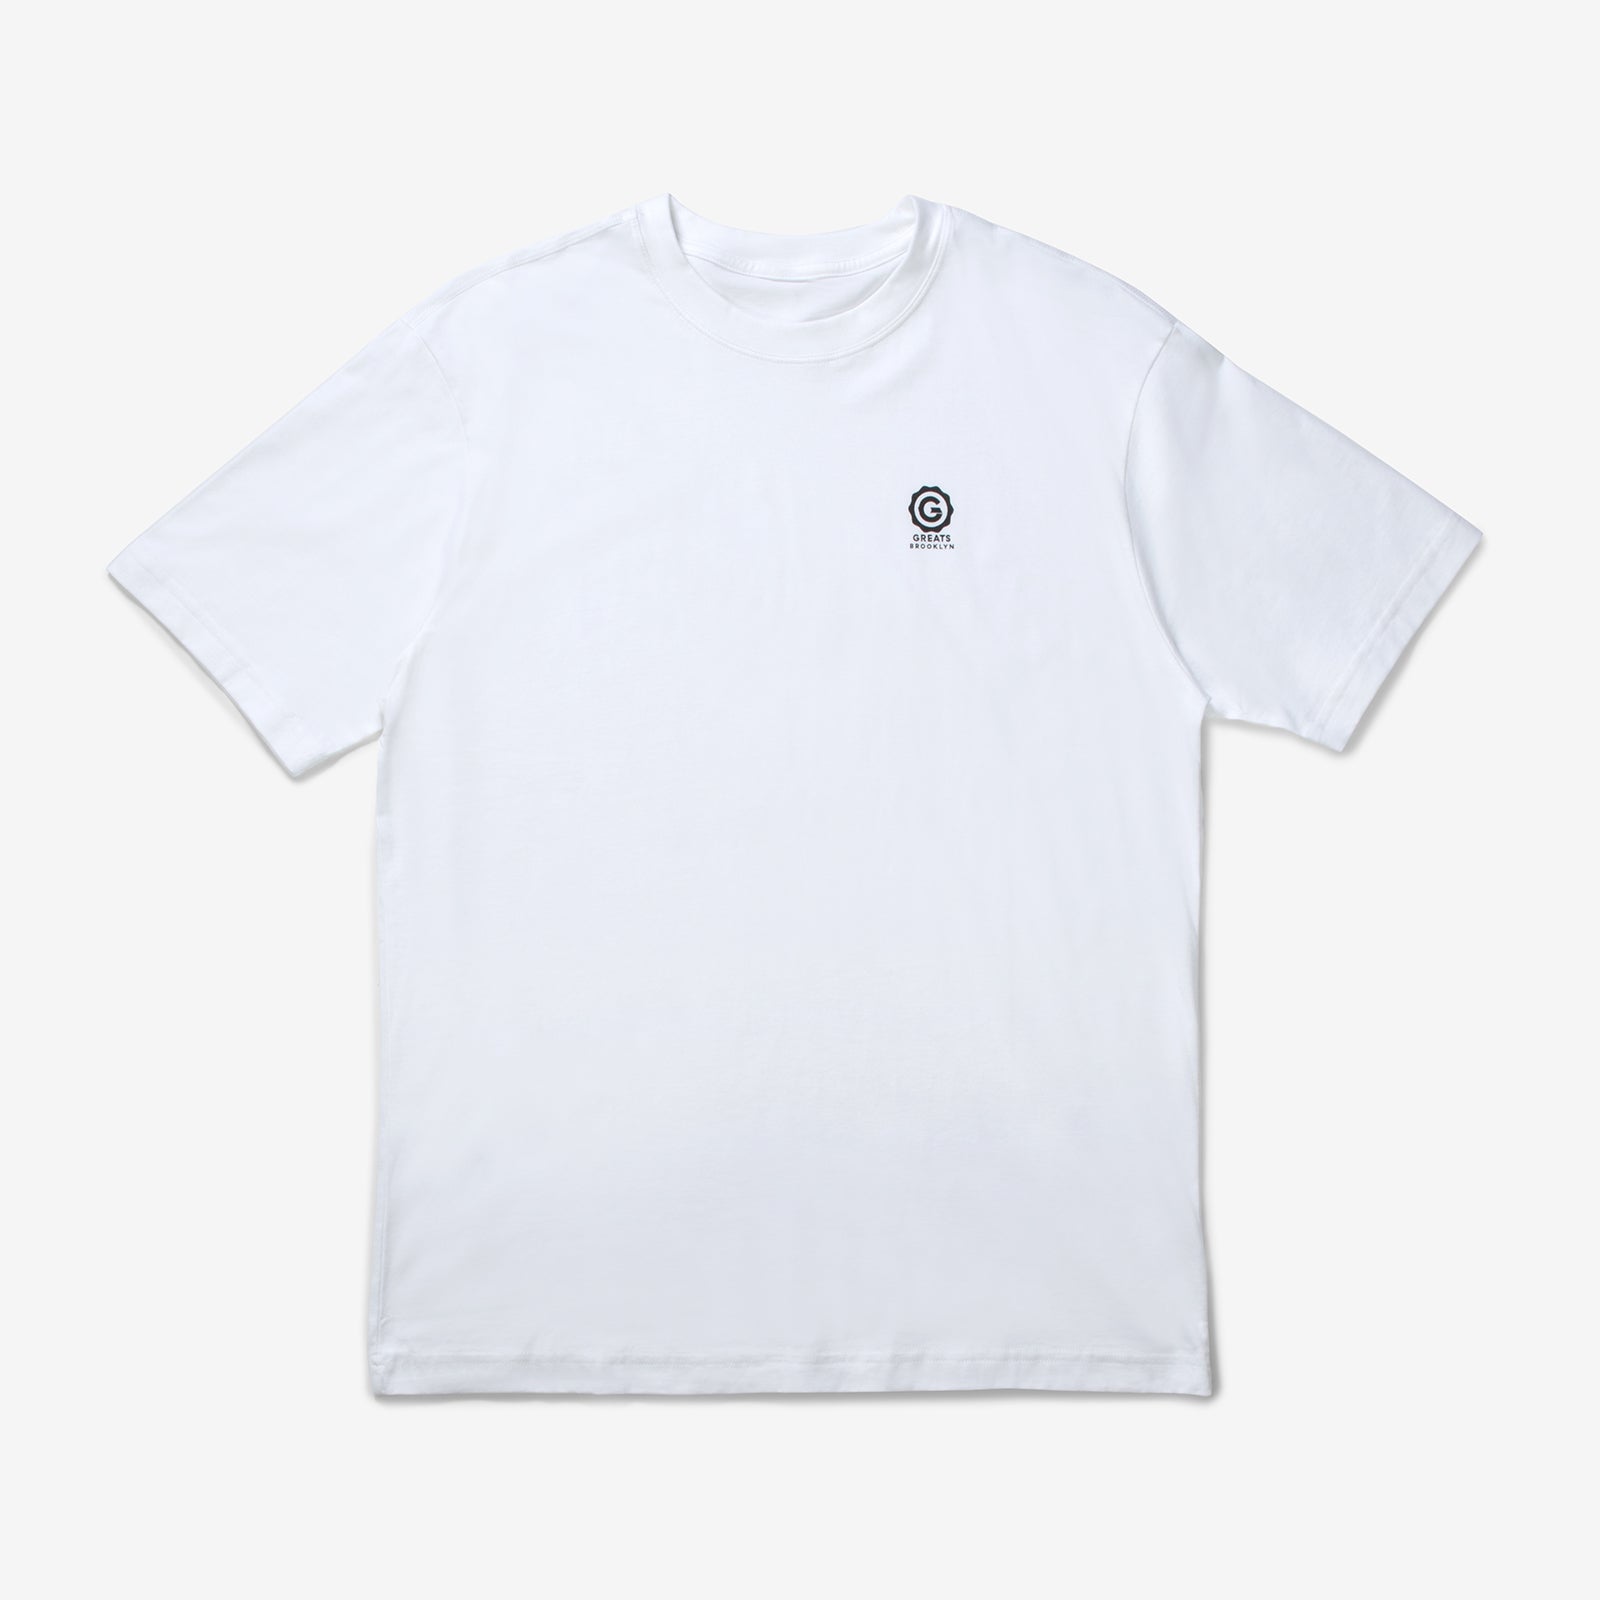 The GREATS Tee - White